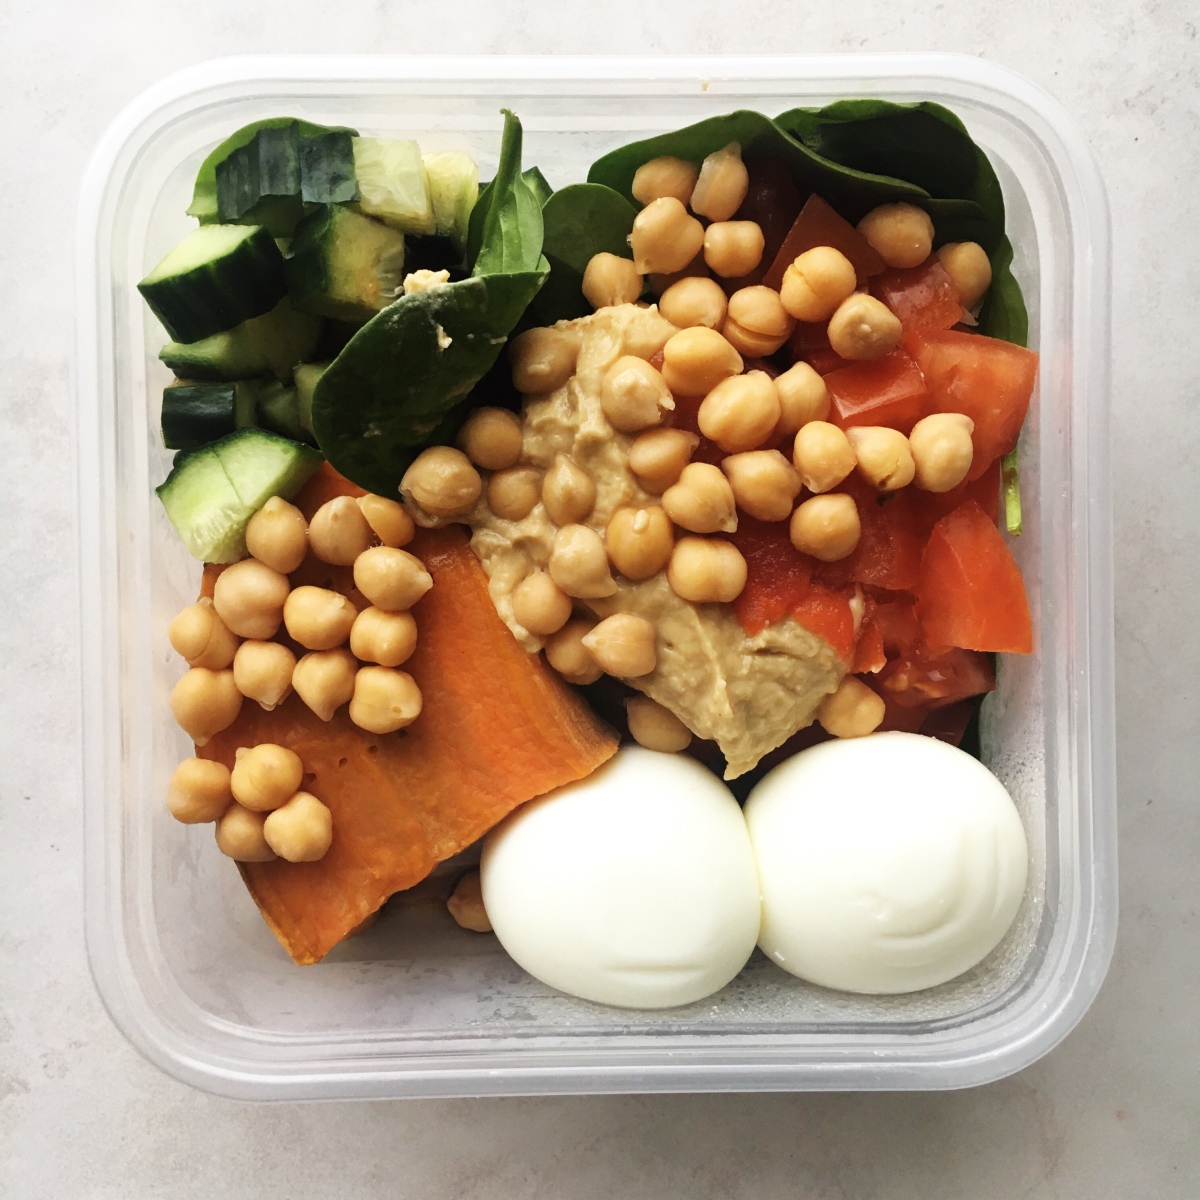 How To Meal Prep The Perfect Lunch Bowl